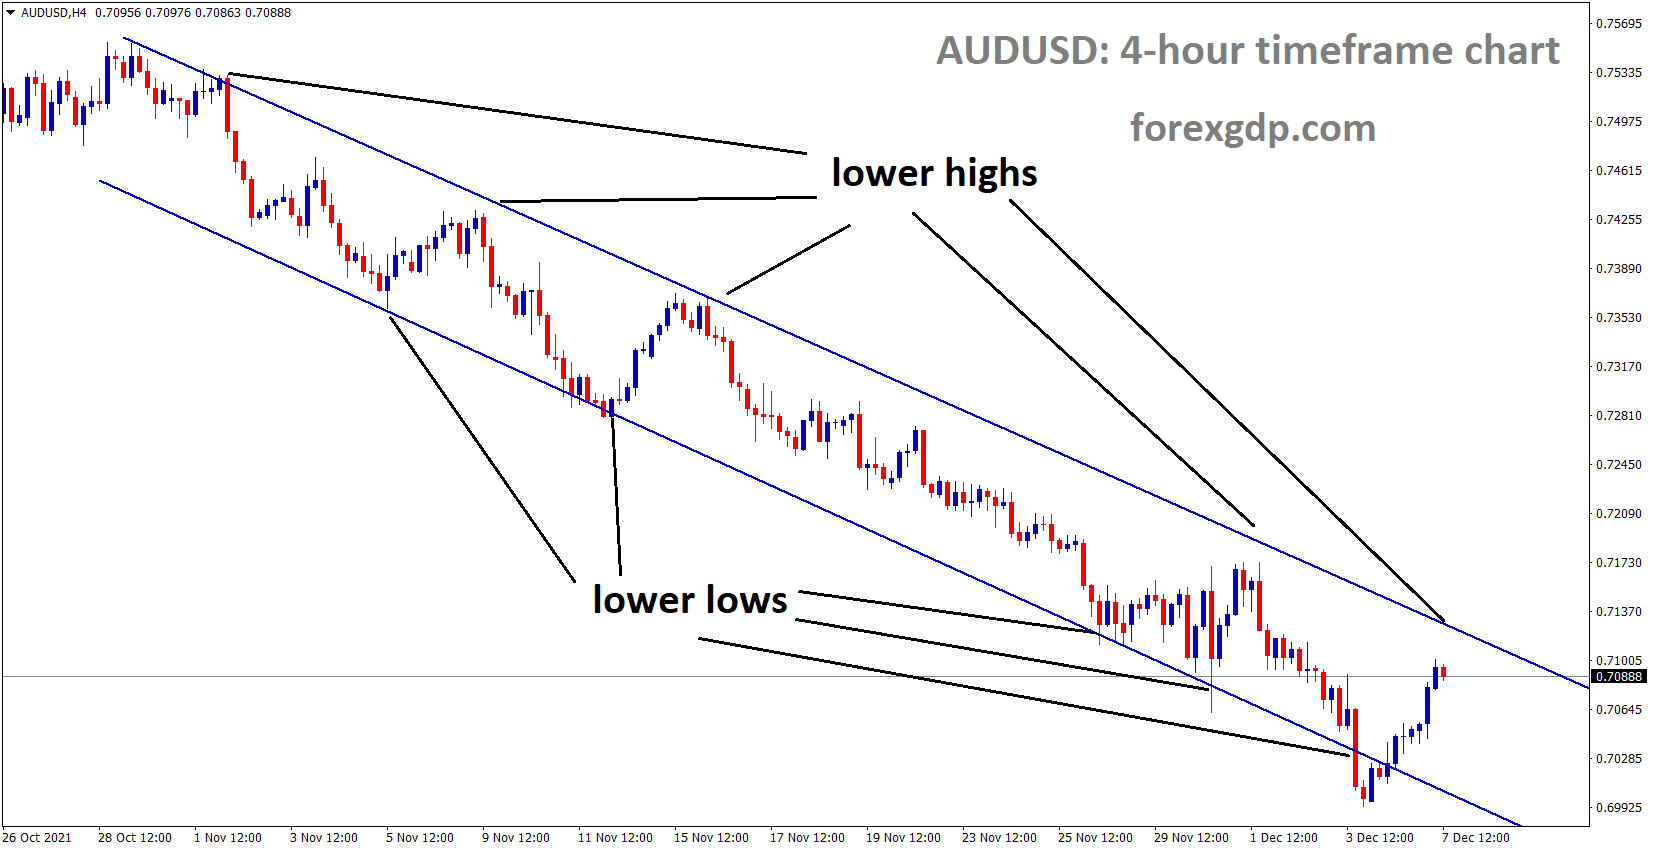 AUDUSD is moving in the Descending channel and the market reached near to the lower high area of the channel